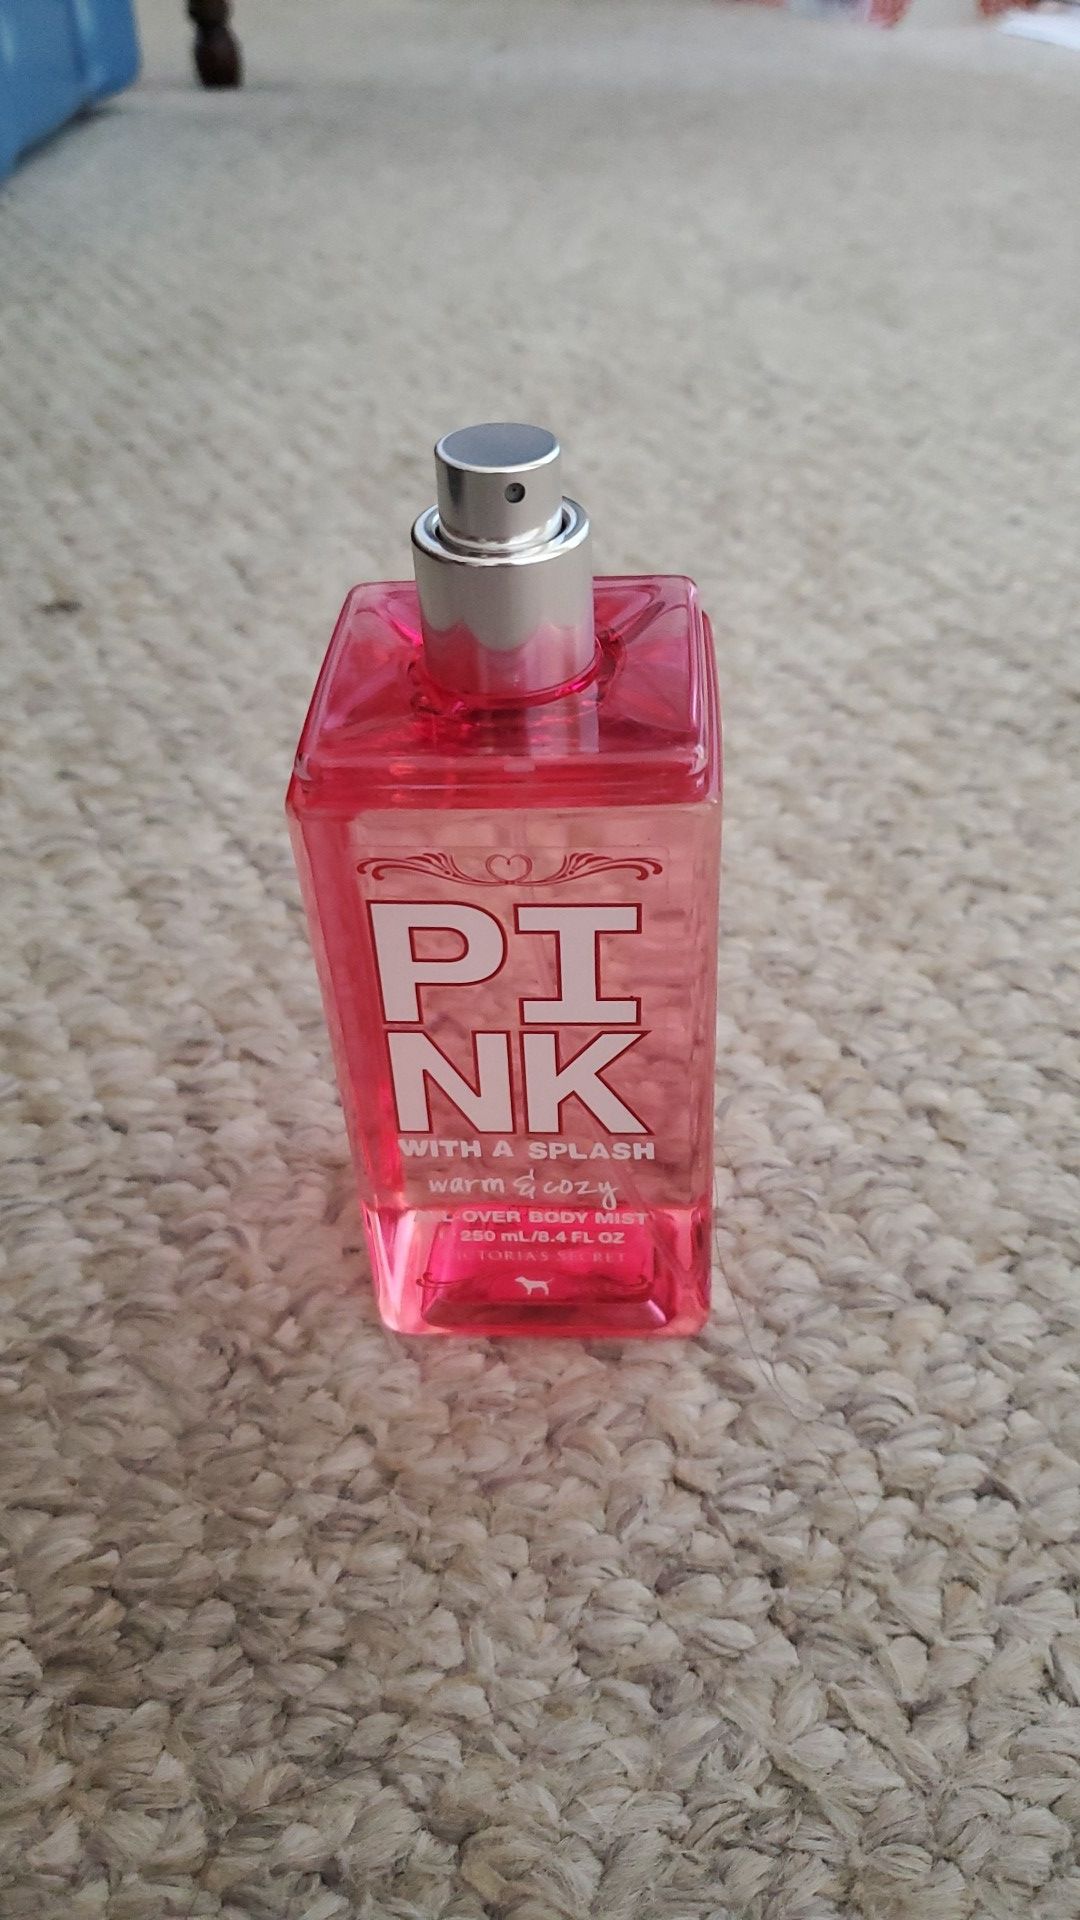 Pink body scent-warm and cozy